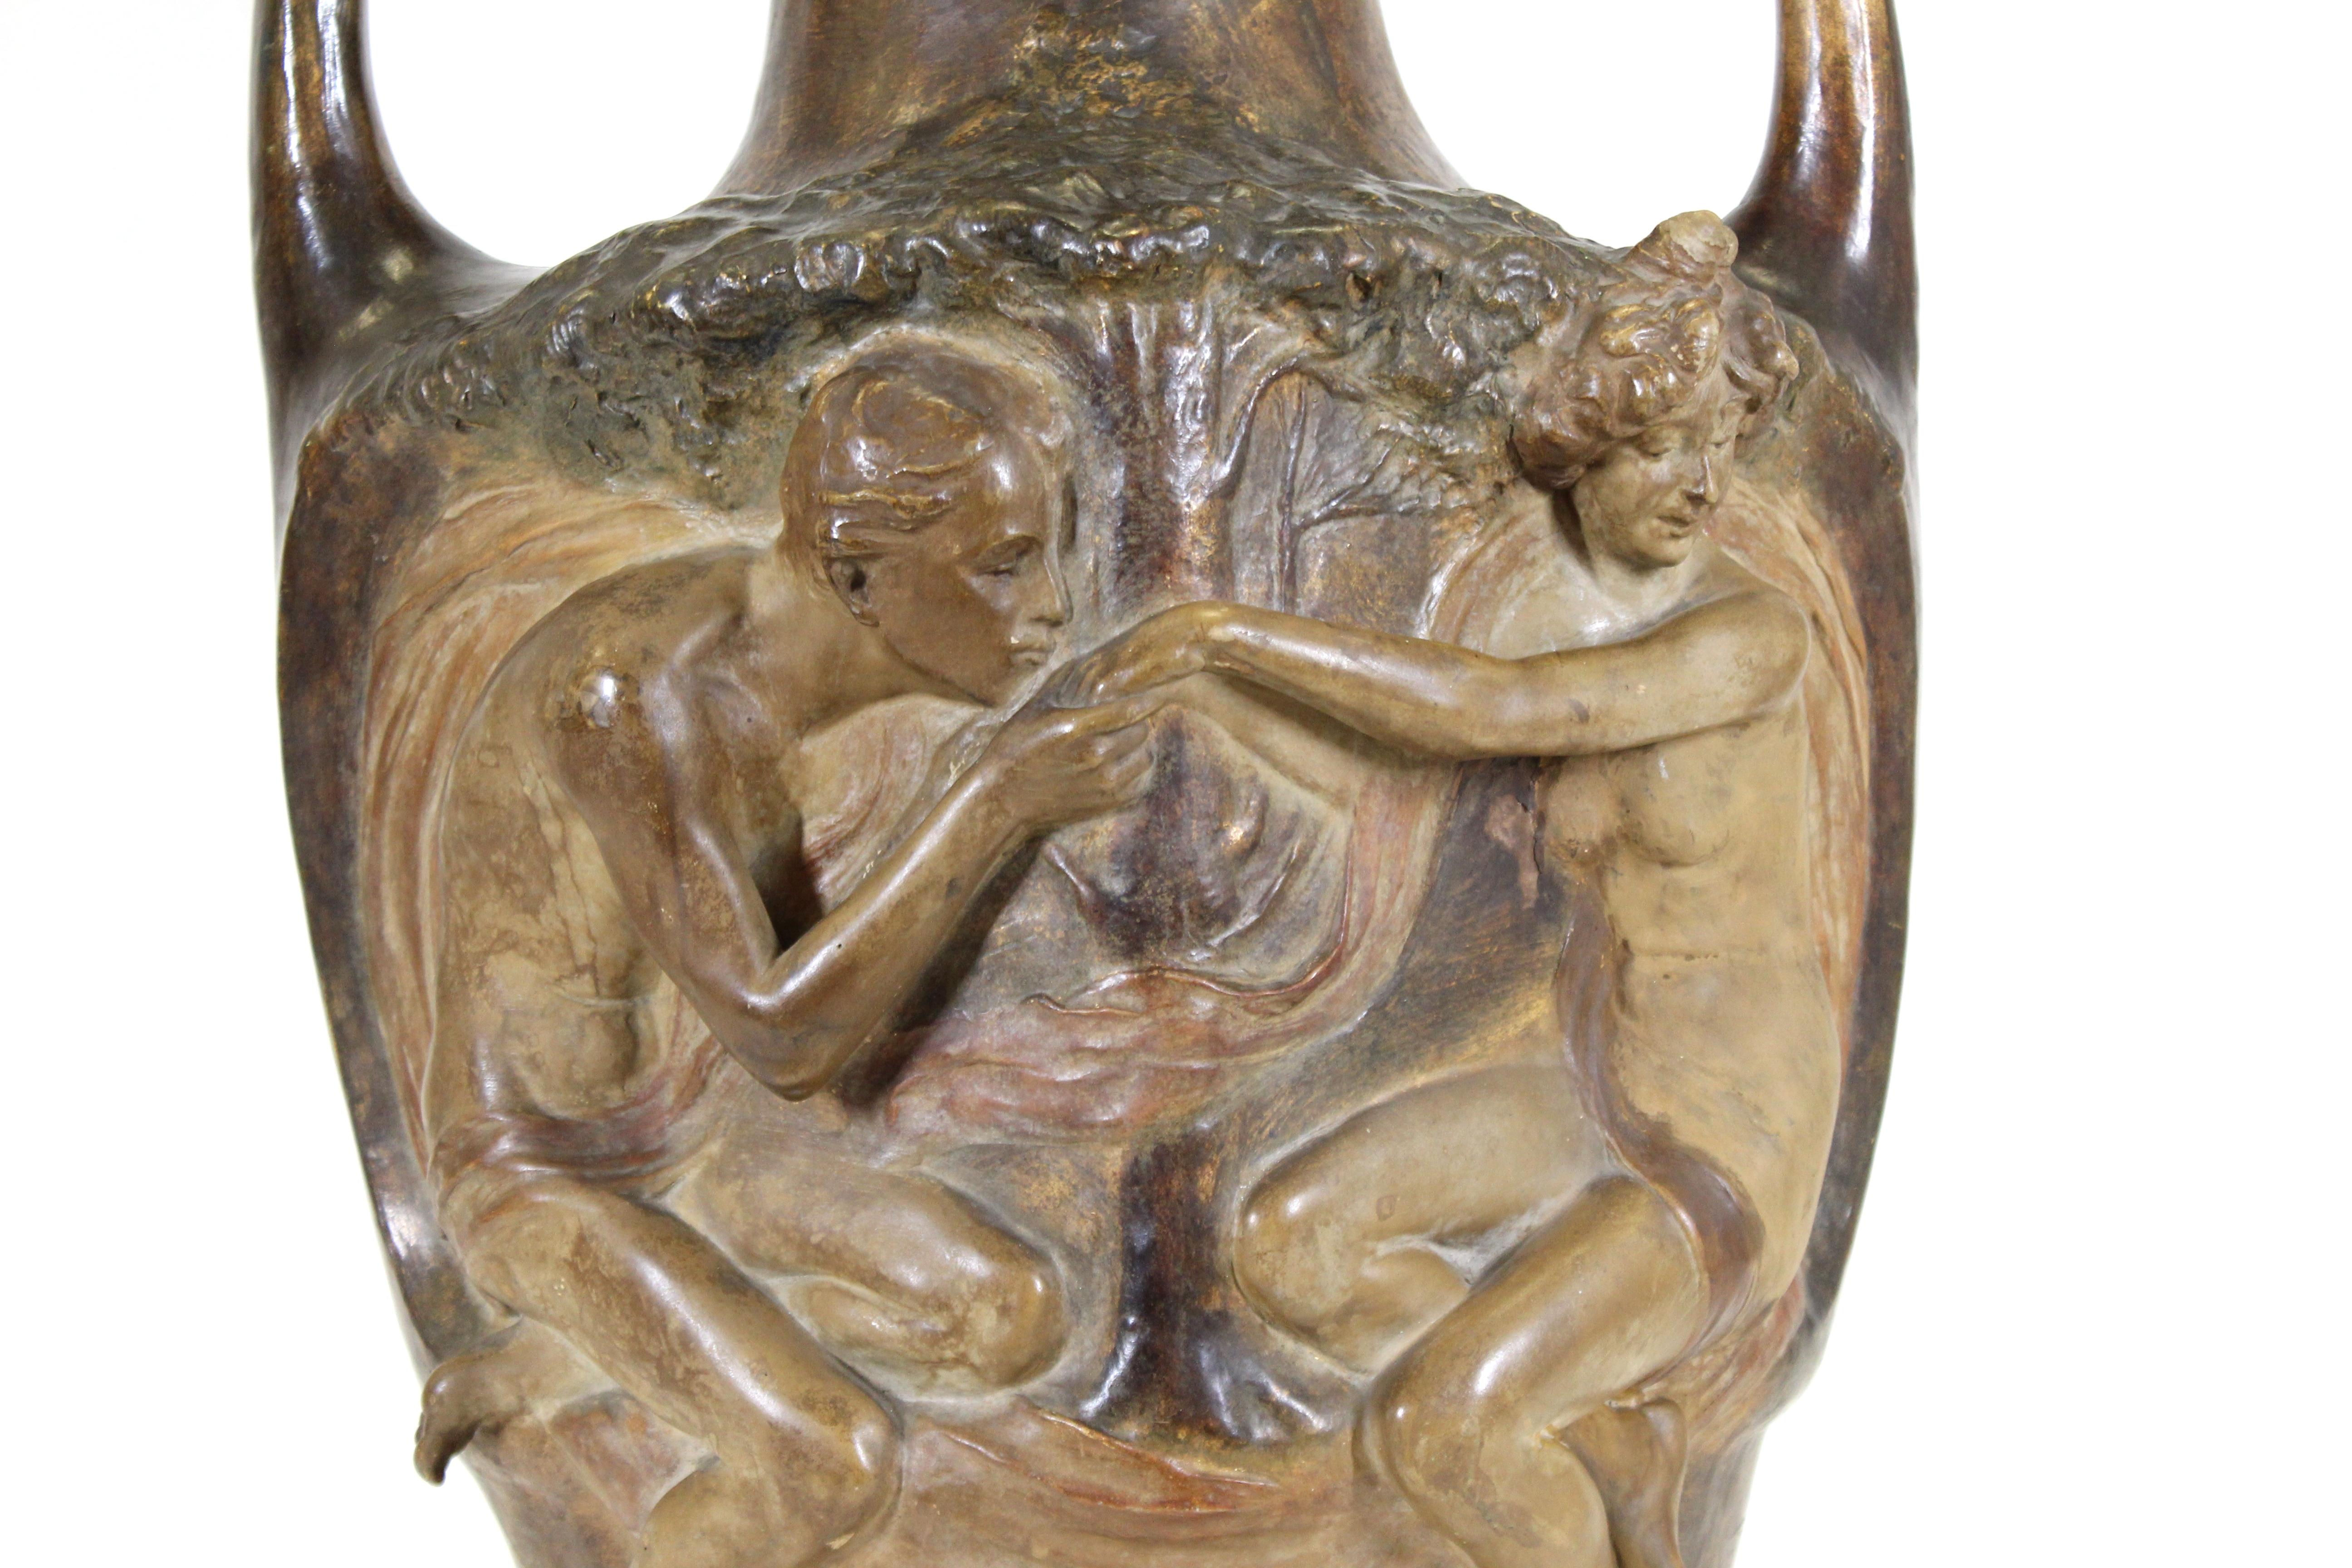 Viennese Art Nouveau large exhibition vase by Lefont for Friedrich Goldscheider. The piece depicts a bas relief of a young couple on one side and putti frolicking in a forest on the back side. Signed Lefont on the side and stamped by Goldscheider.